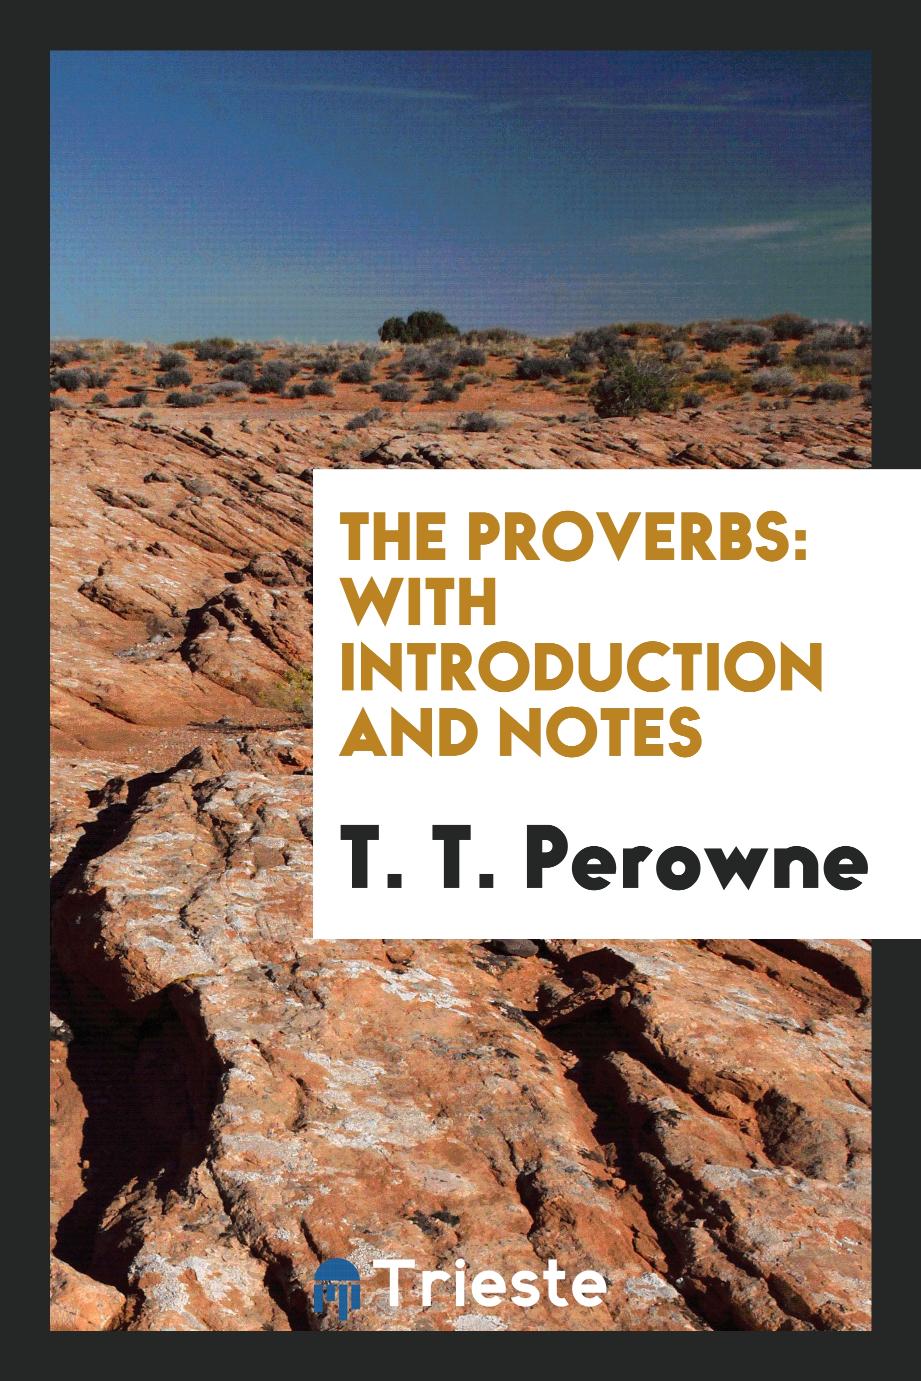 The Proverbs: with introduction and notes